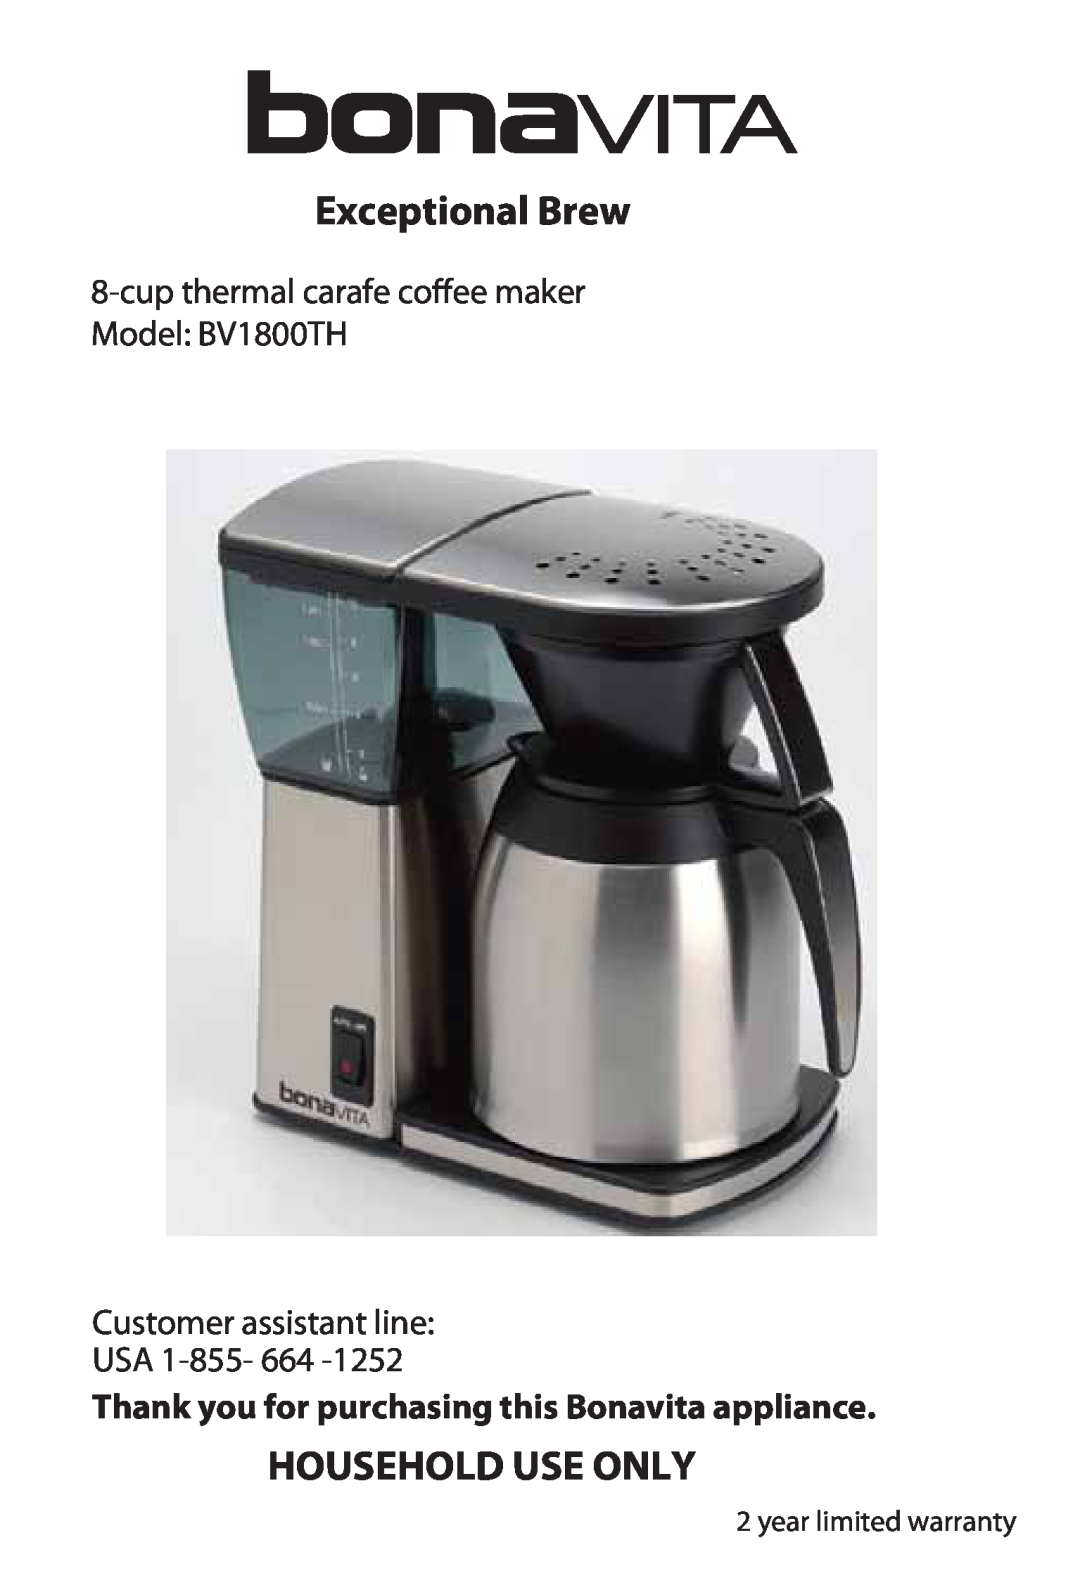 Bonavita warranty Exceptional Brew, Household Use Only, cupthermal carafe coee maker Model BV1800TH 